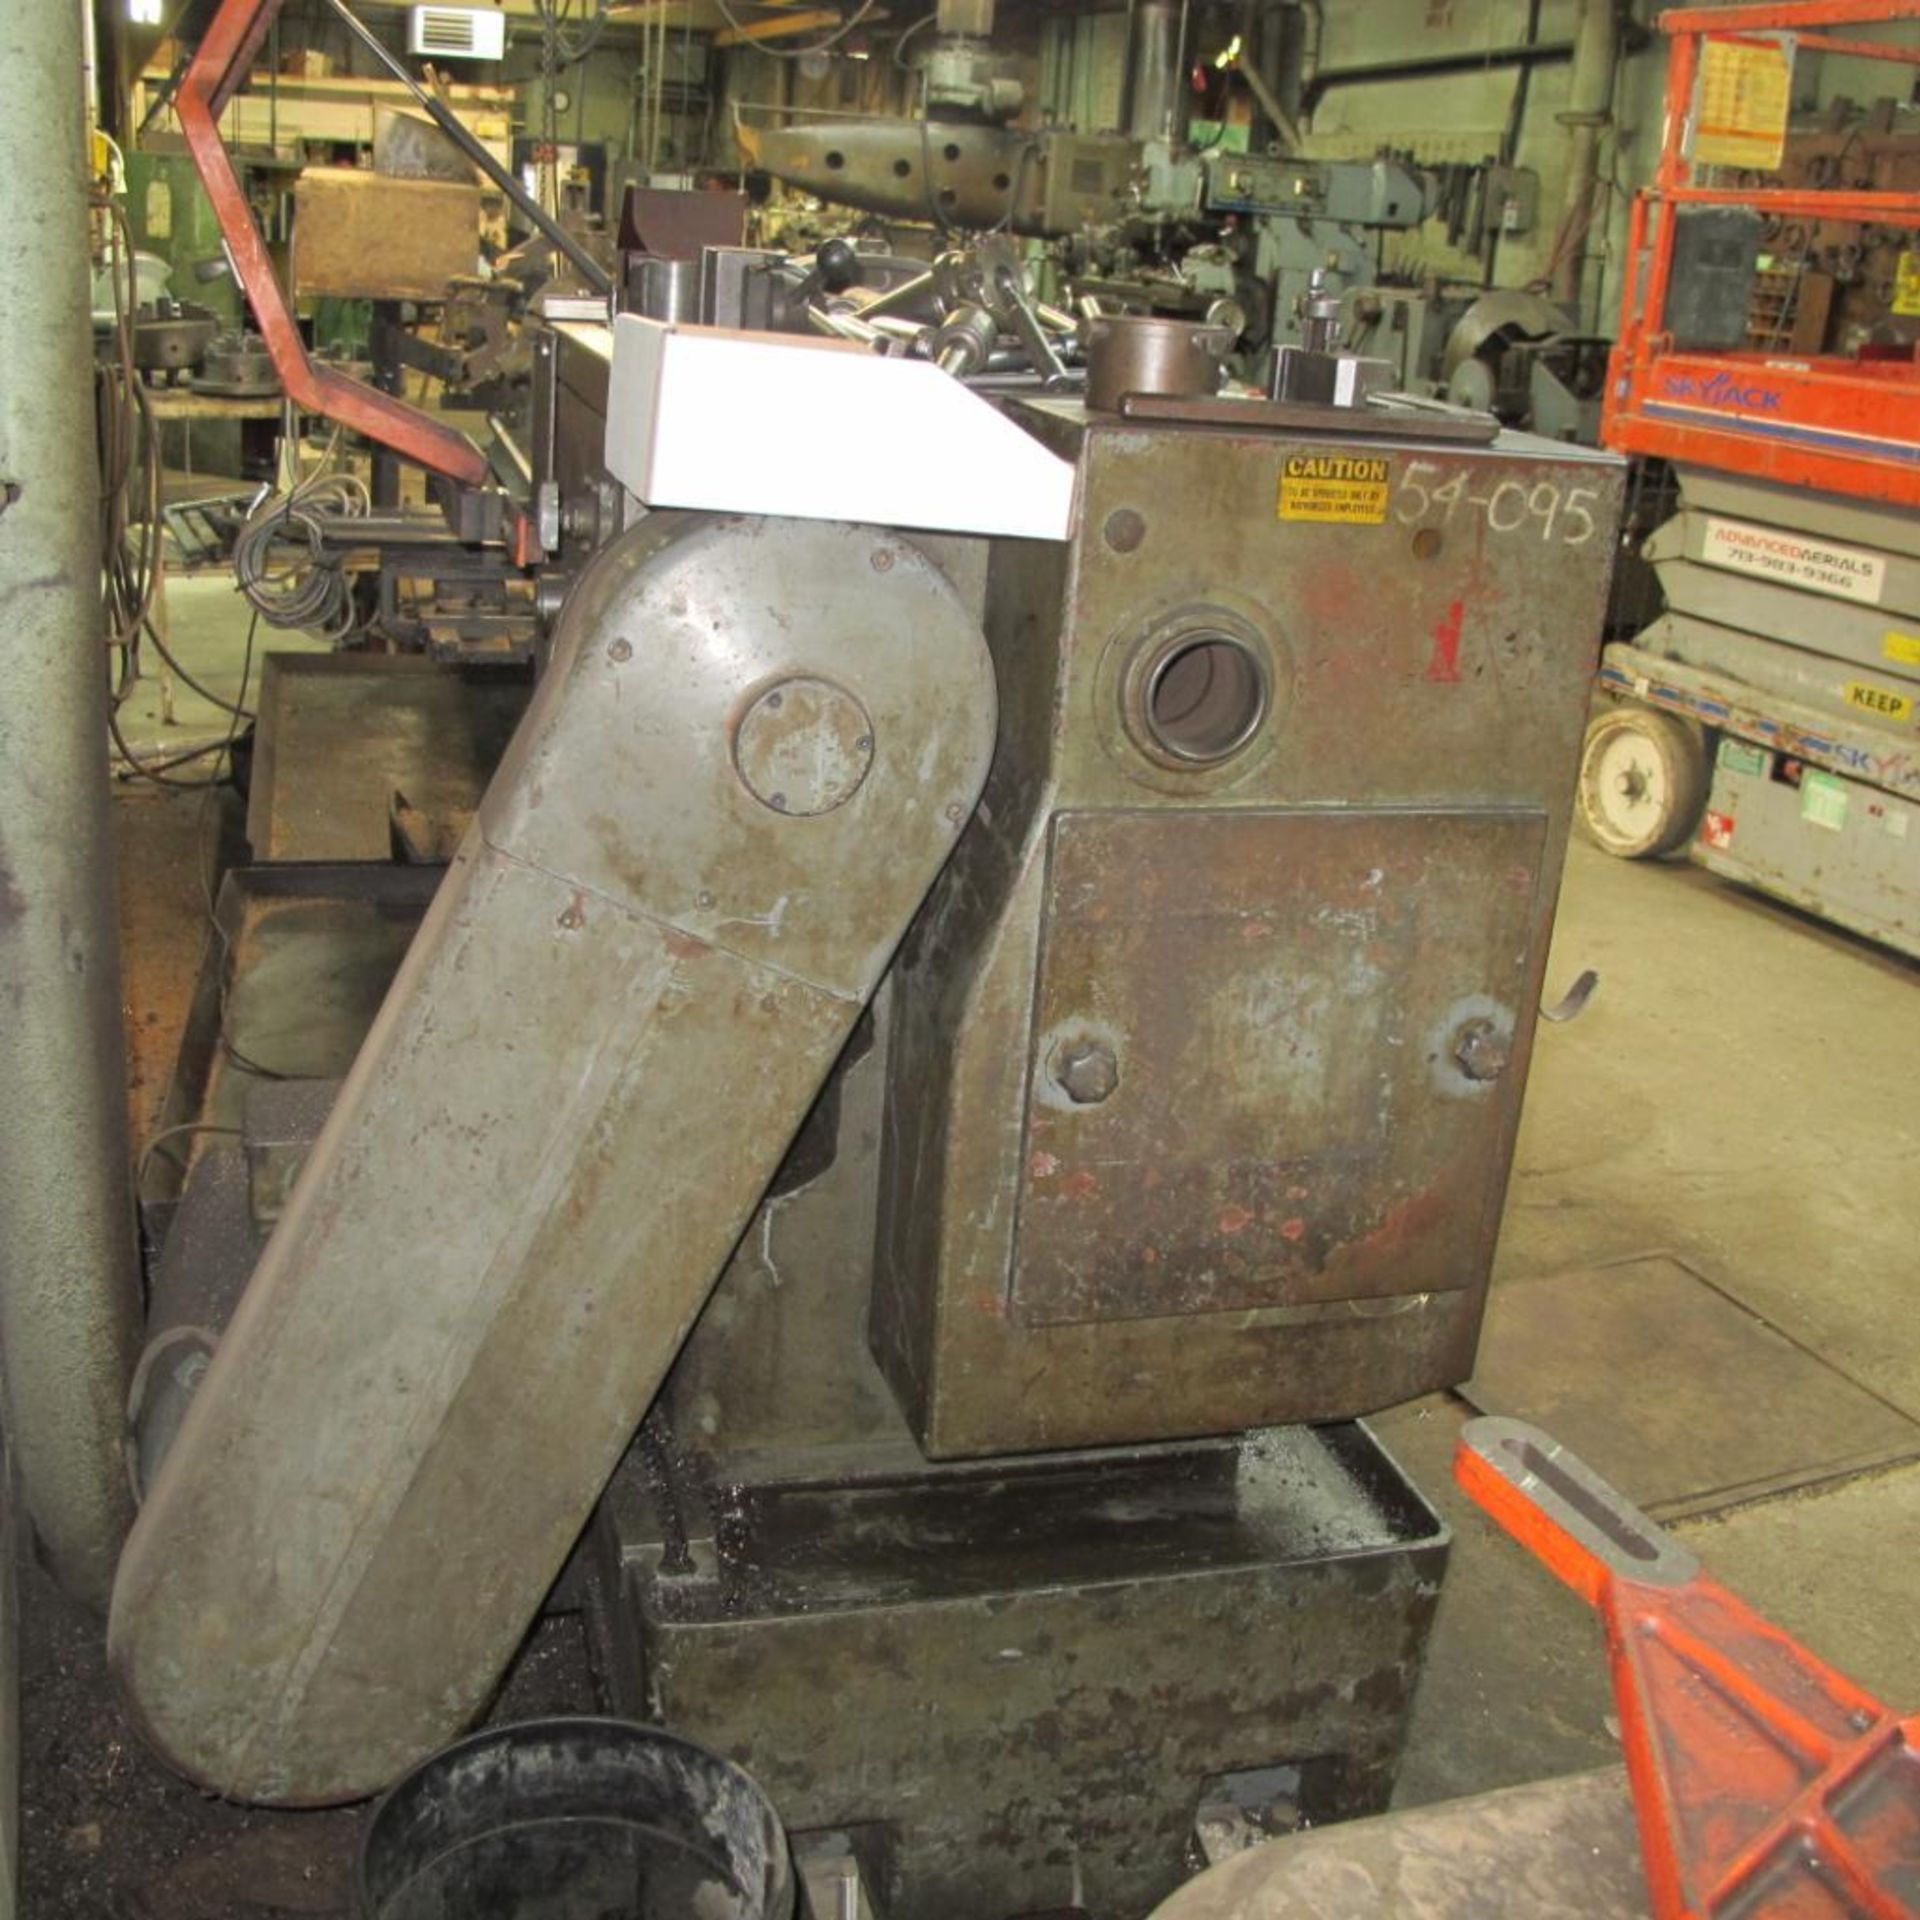 VDF 24" X 10' LATHE, 22" 4 JAW CHUCK, 3 1/4" BORE, TAILSTOCK, STEADY REST, FOLLOW REST, TOOL POSTS, - Image 16 of 16